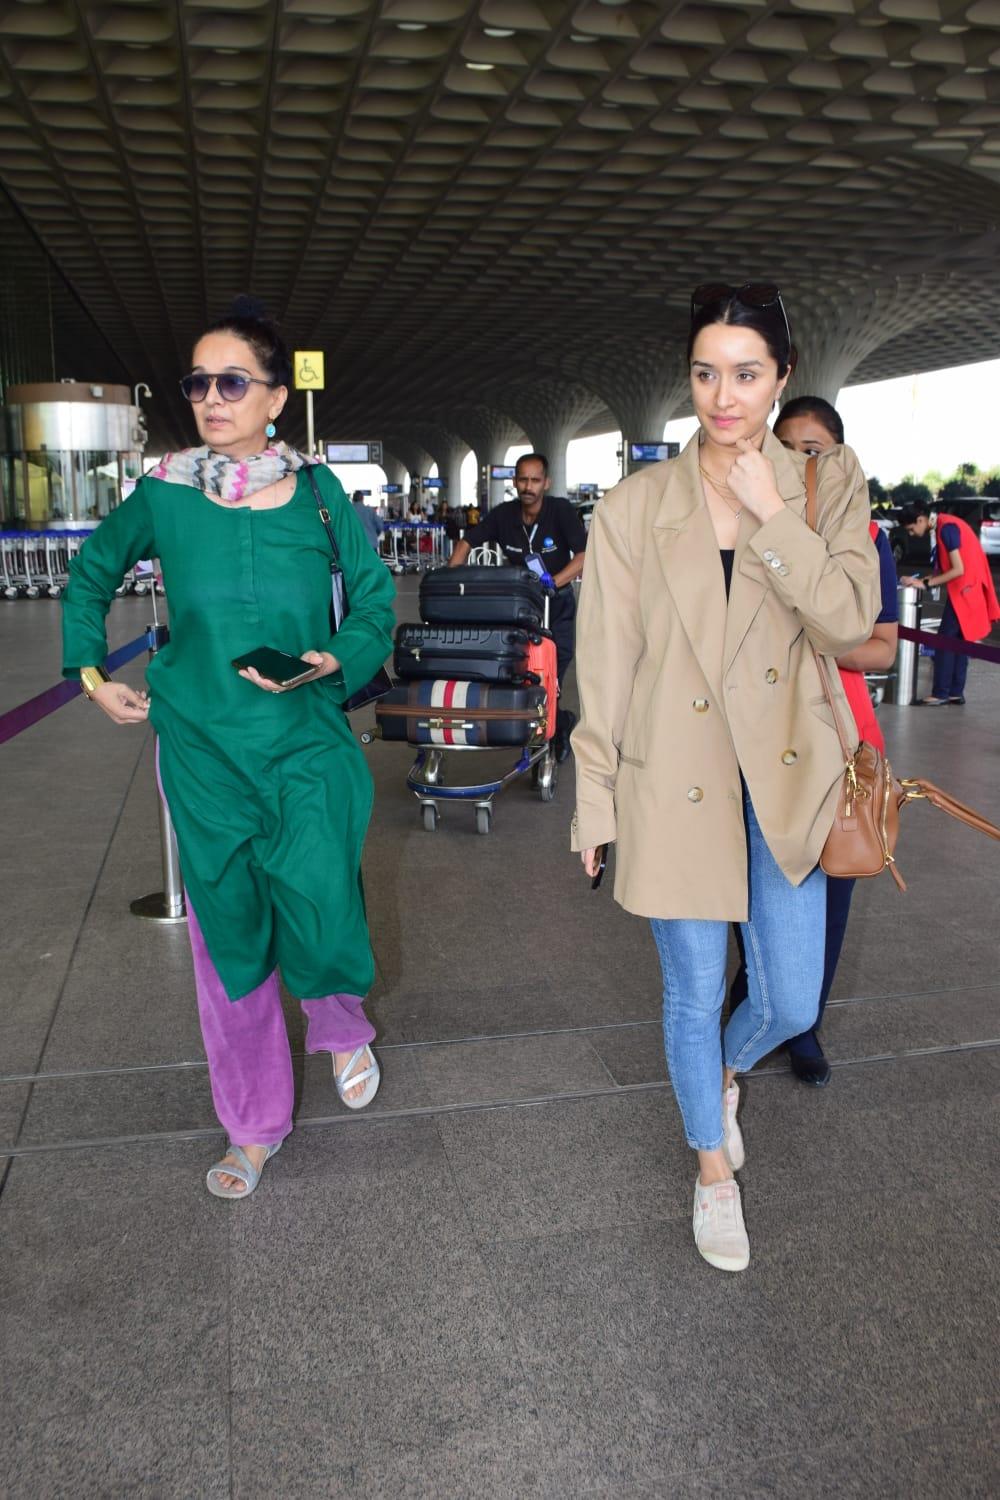 Shraddha Kapoor and her mother were spotted at the airport as they jetted off